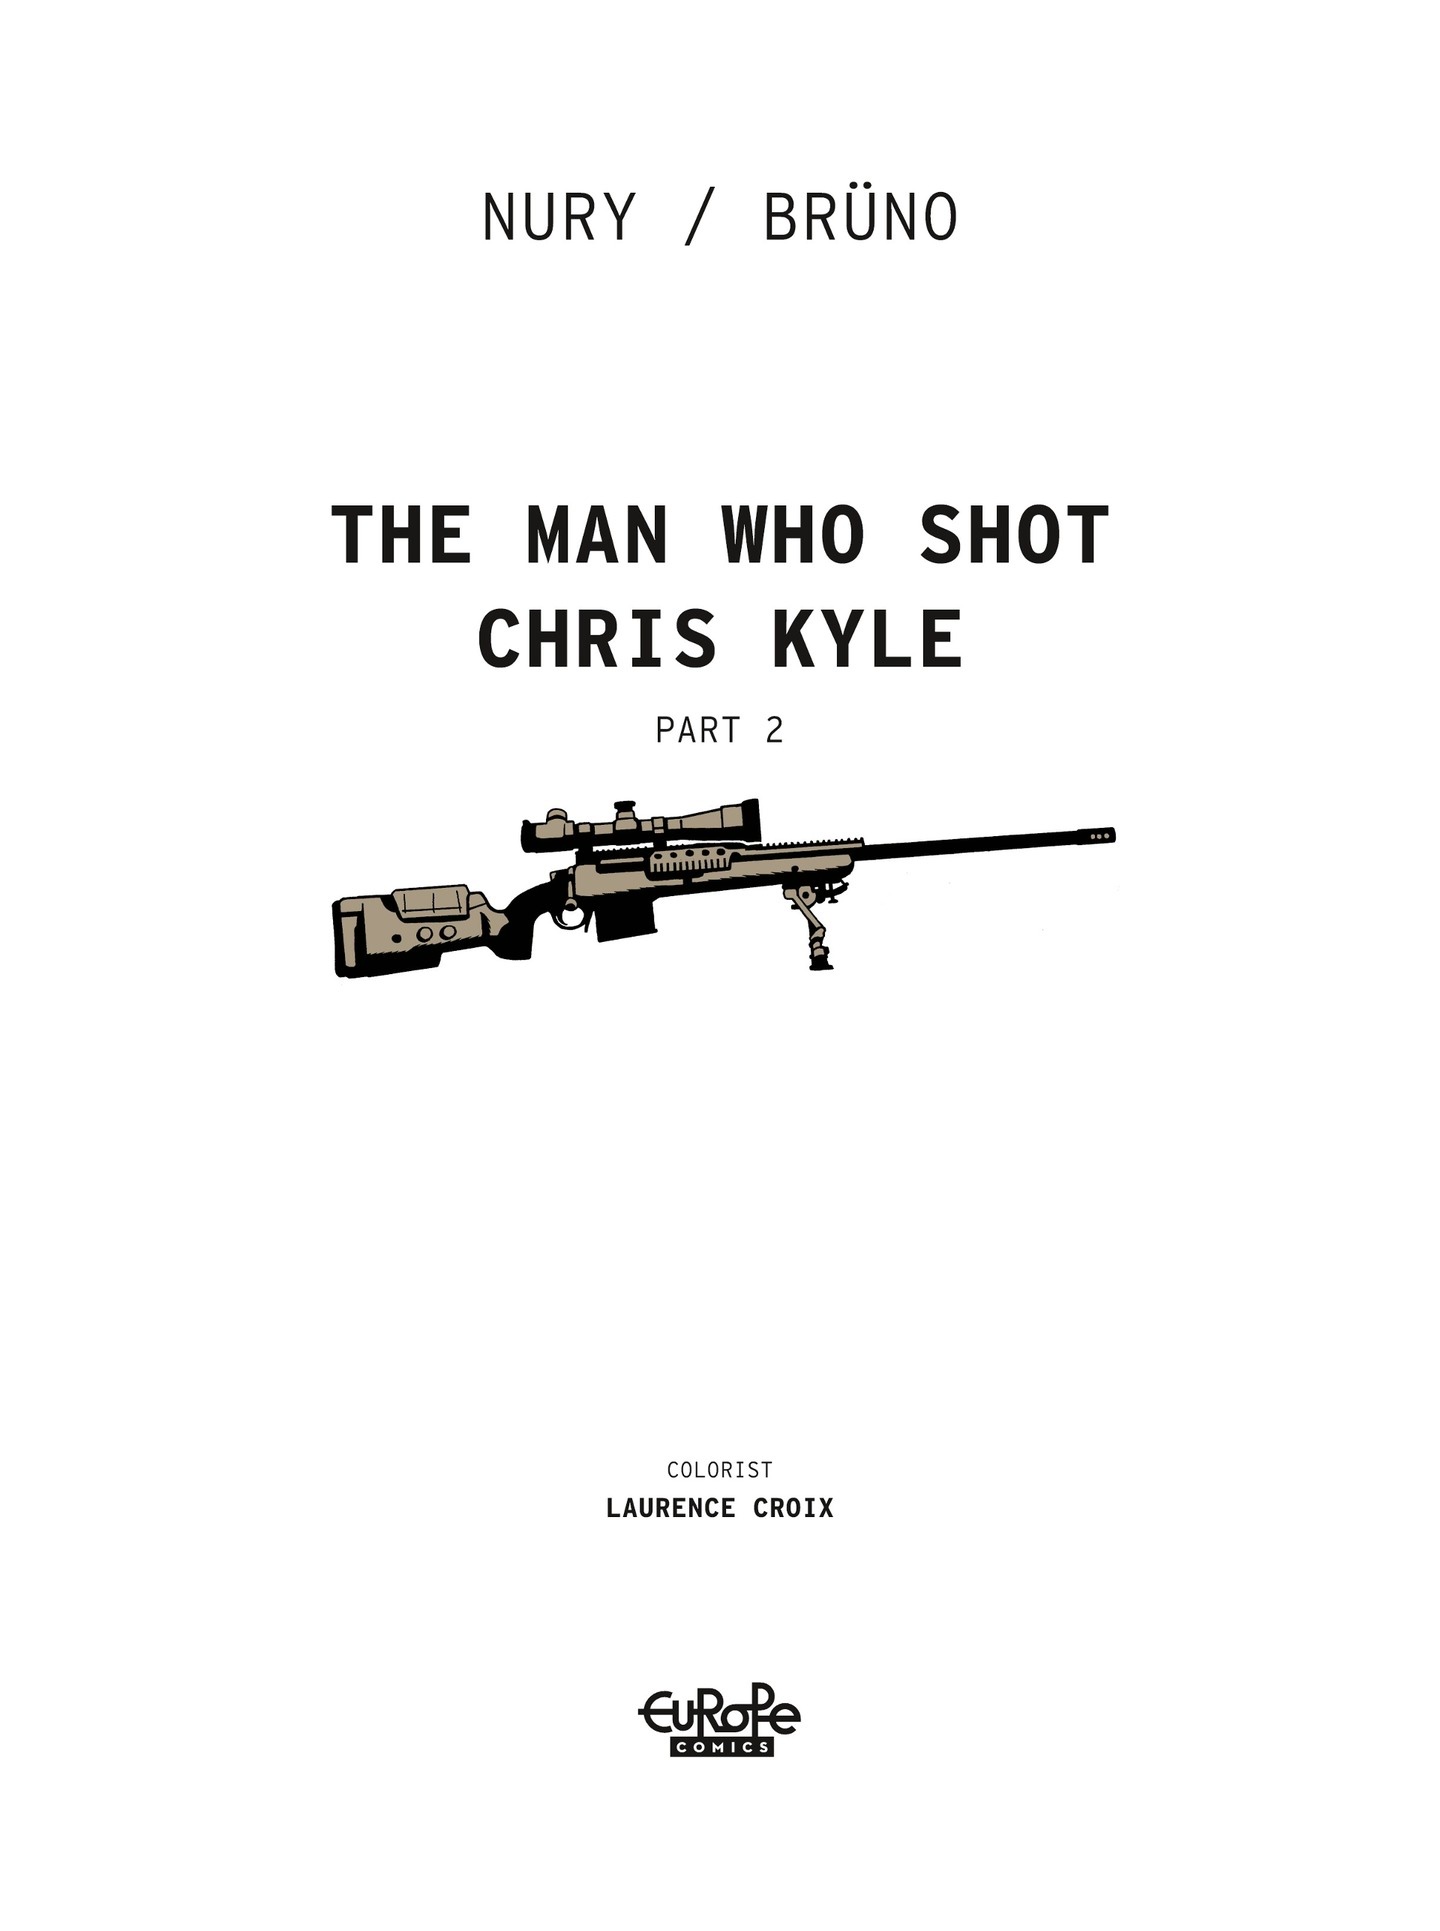 Read online The Man Who Shot Chris Kyle: An American Legend comic -  Issue # TPB 2 - 3